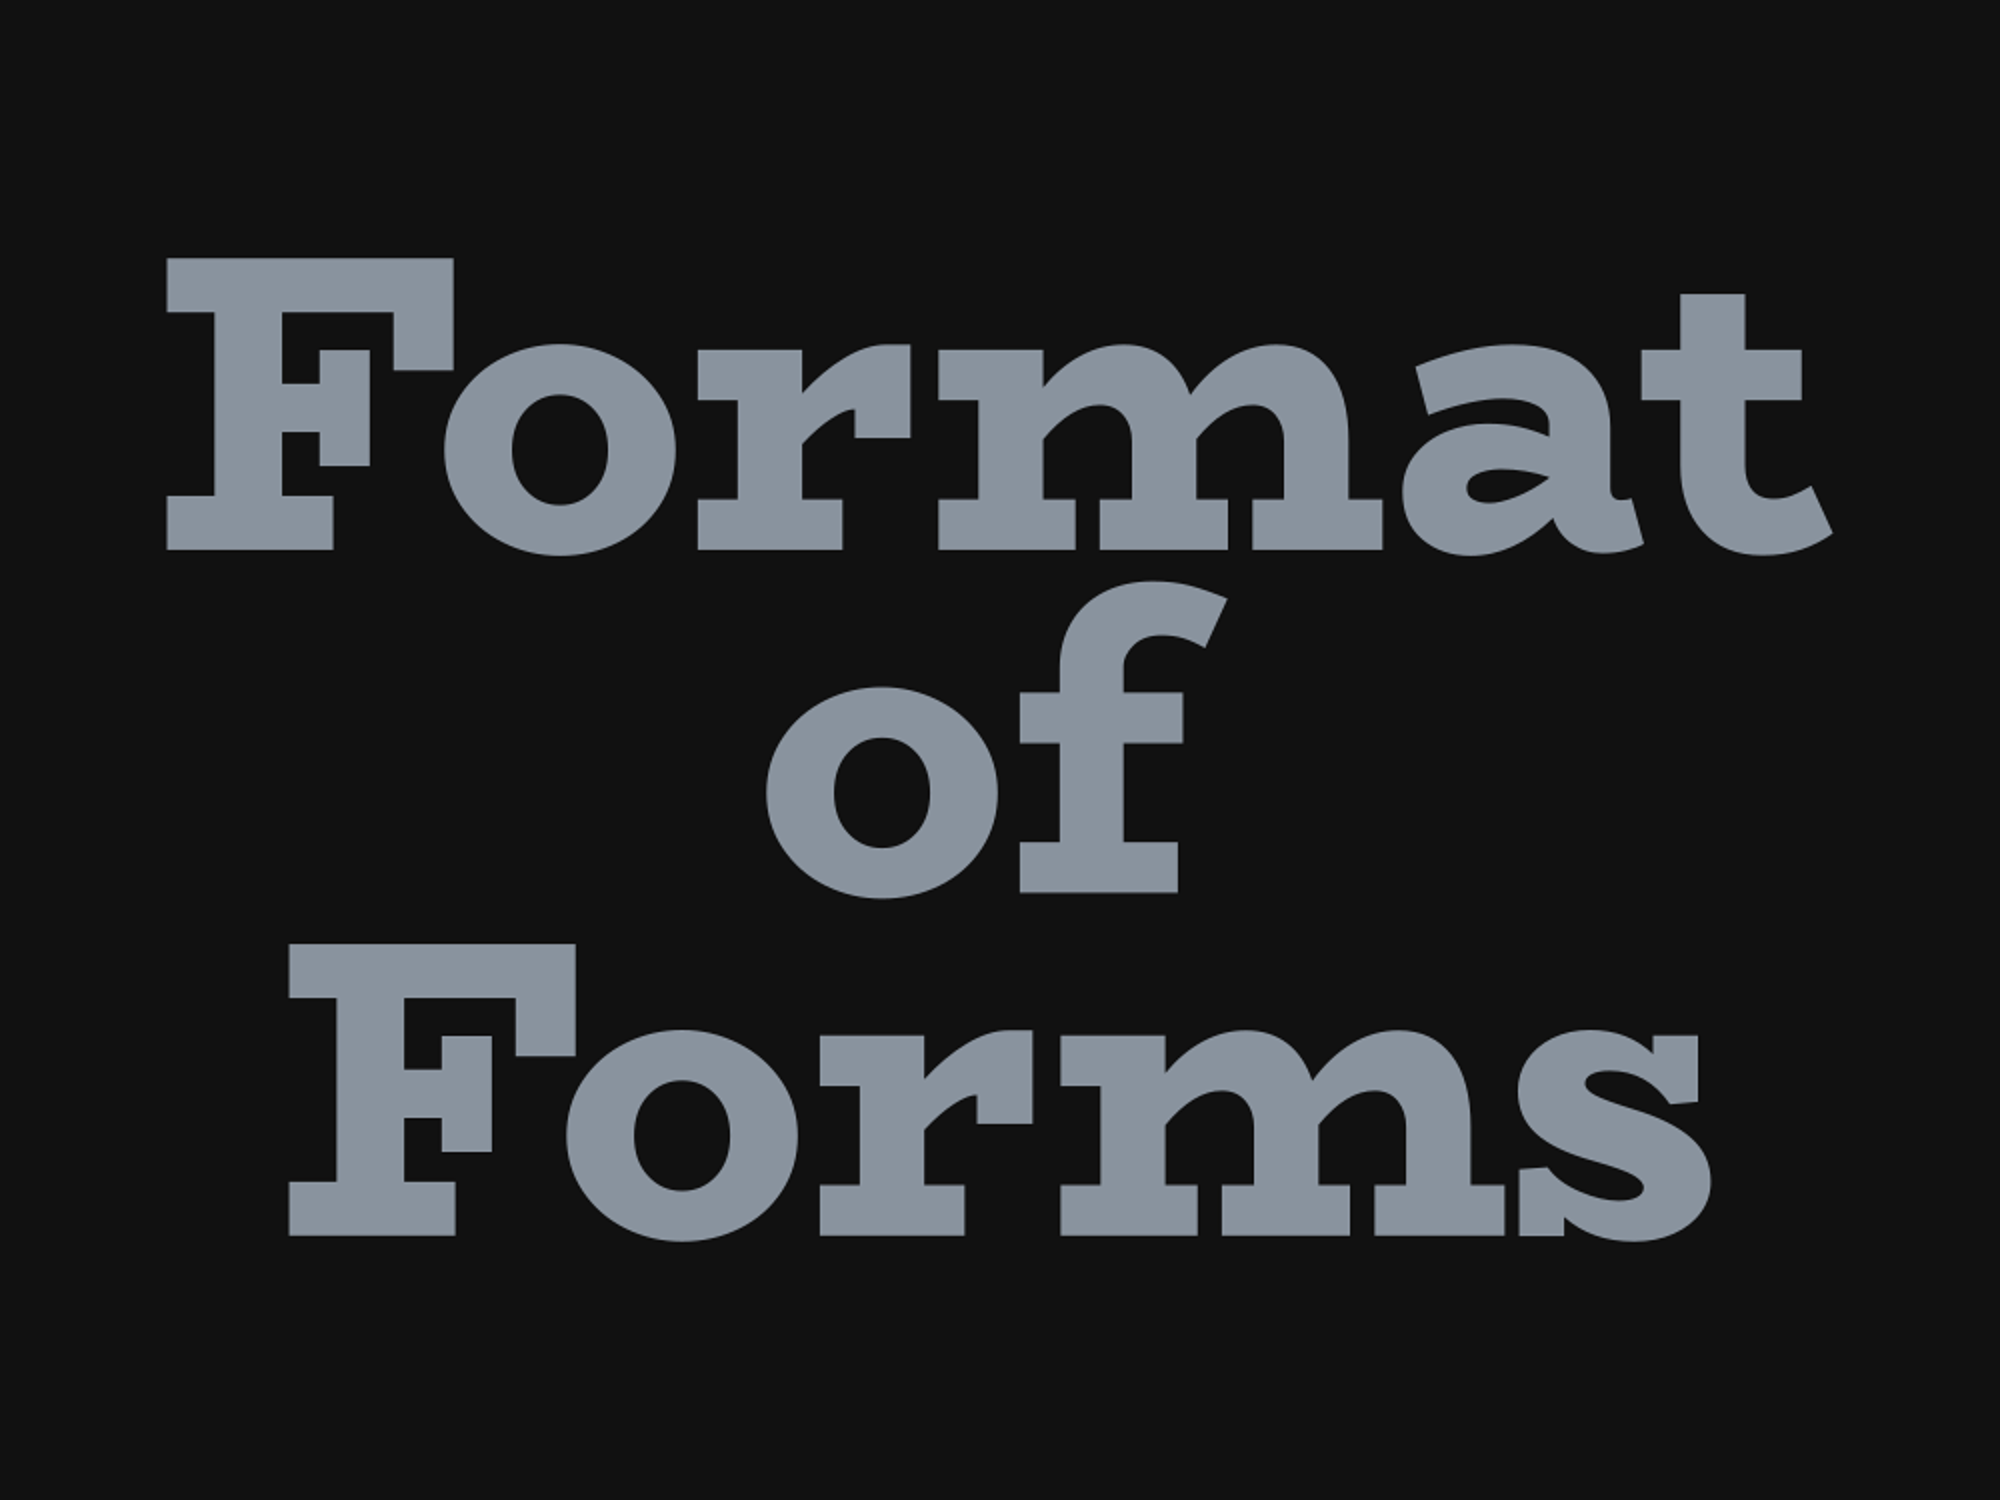 Format of Forms